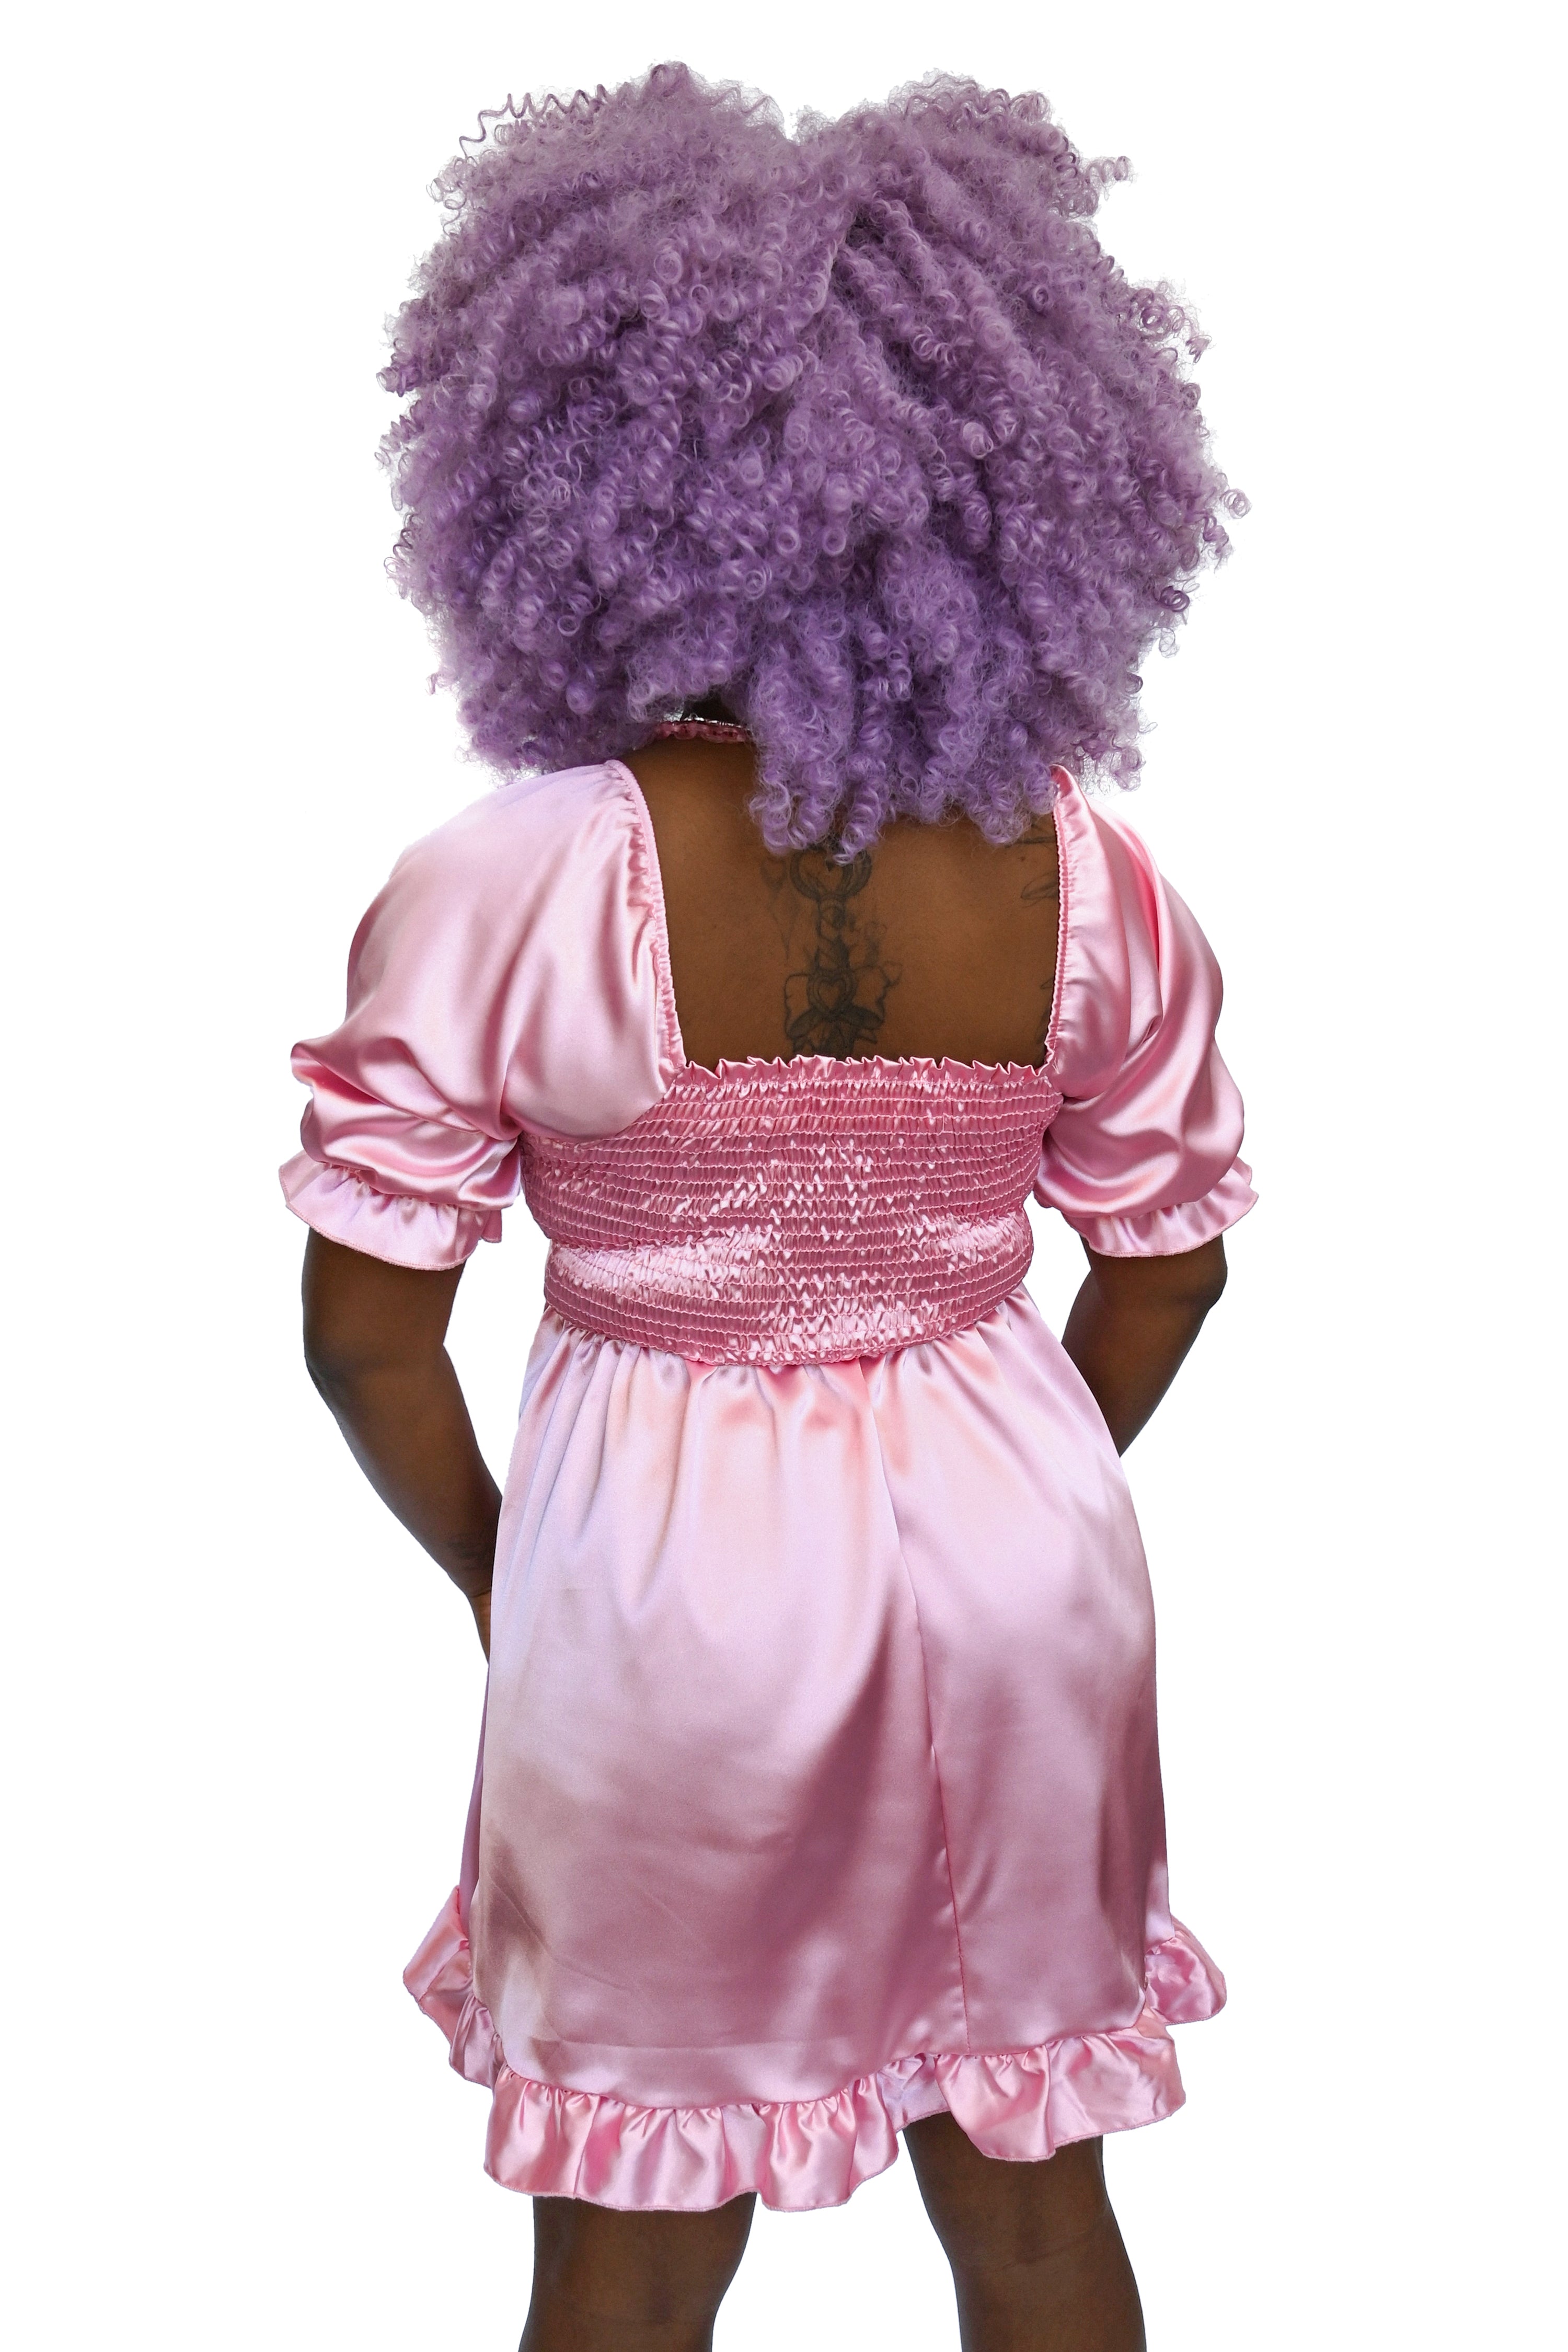 Baby pink satin babydoll dress with a square neckline, poofy sleeves with ruffle trim! Back is shirred